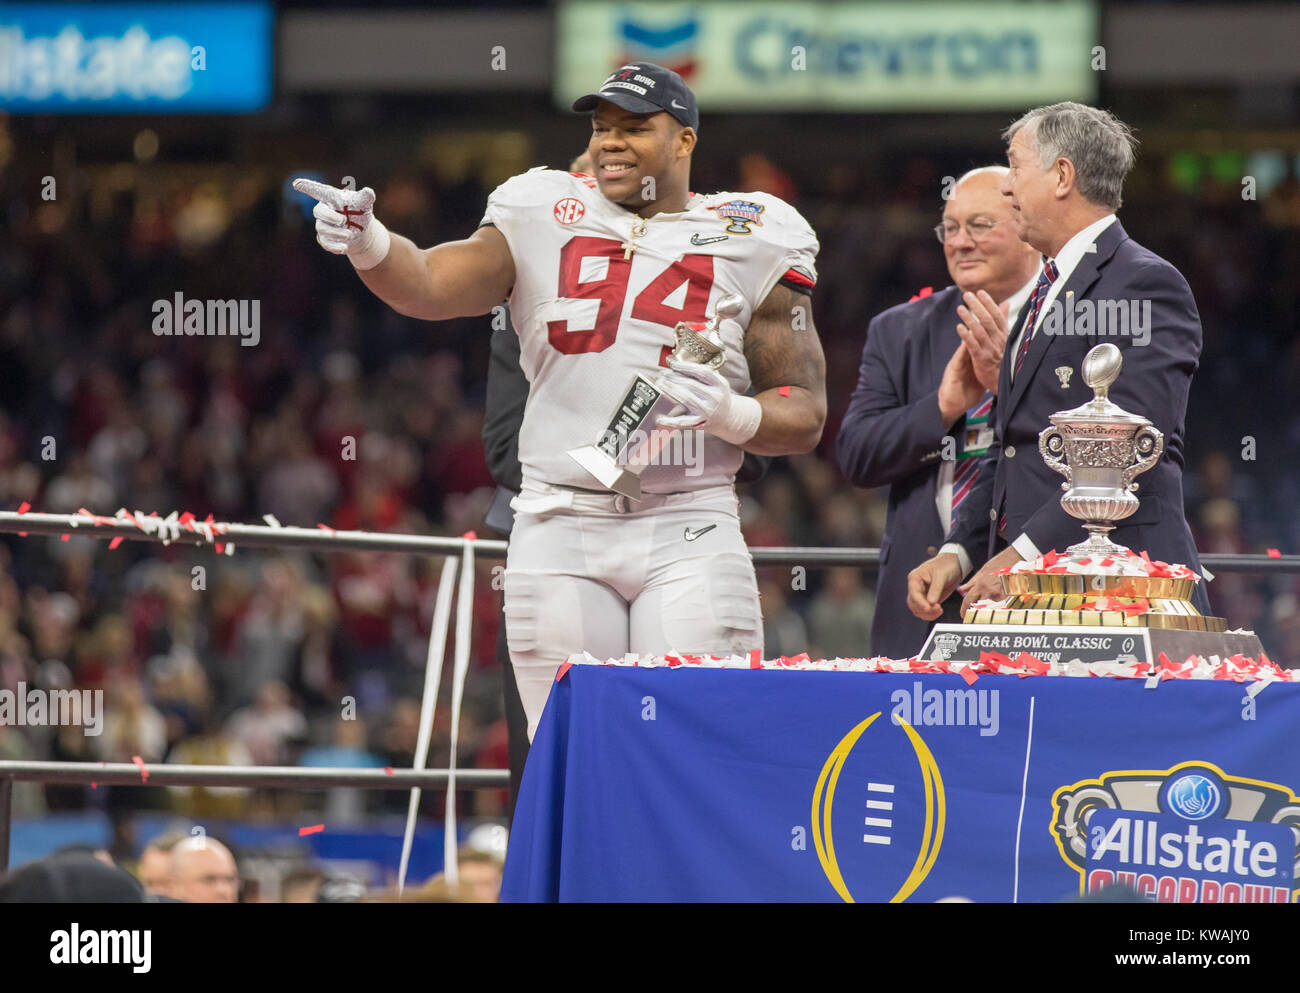 New Orleans, LA, USA. 1st Jan, 2018. Alabama's Da'Ron Payne #94 is awarded the defensive player of the game following the Allstate Sugar Bowl football game between the Clemson Tigers and the Alabama Crimson Tide at the Mercedes-Benz Supedome in New Orleans, LA. Kyle Okita/CSM/Alamy Live News Stock Photo